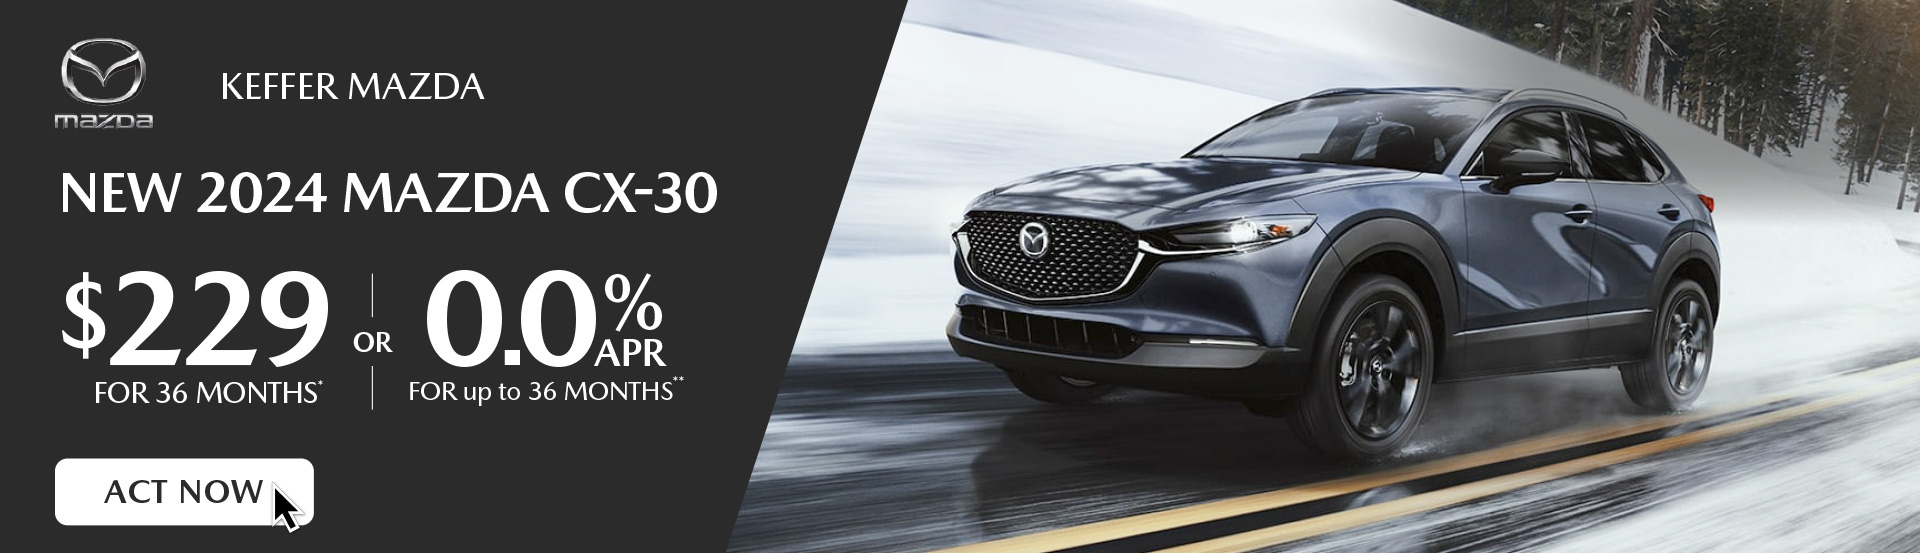 NEW 2024 MAZDA CX-90 – $449/mo for 36 months* or 0.9% for up to 36 months plus No Payments for up to 90 Days**